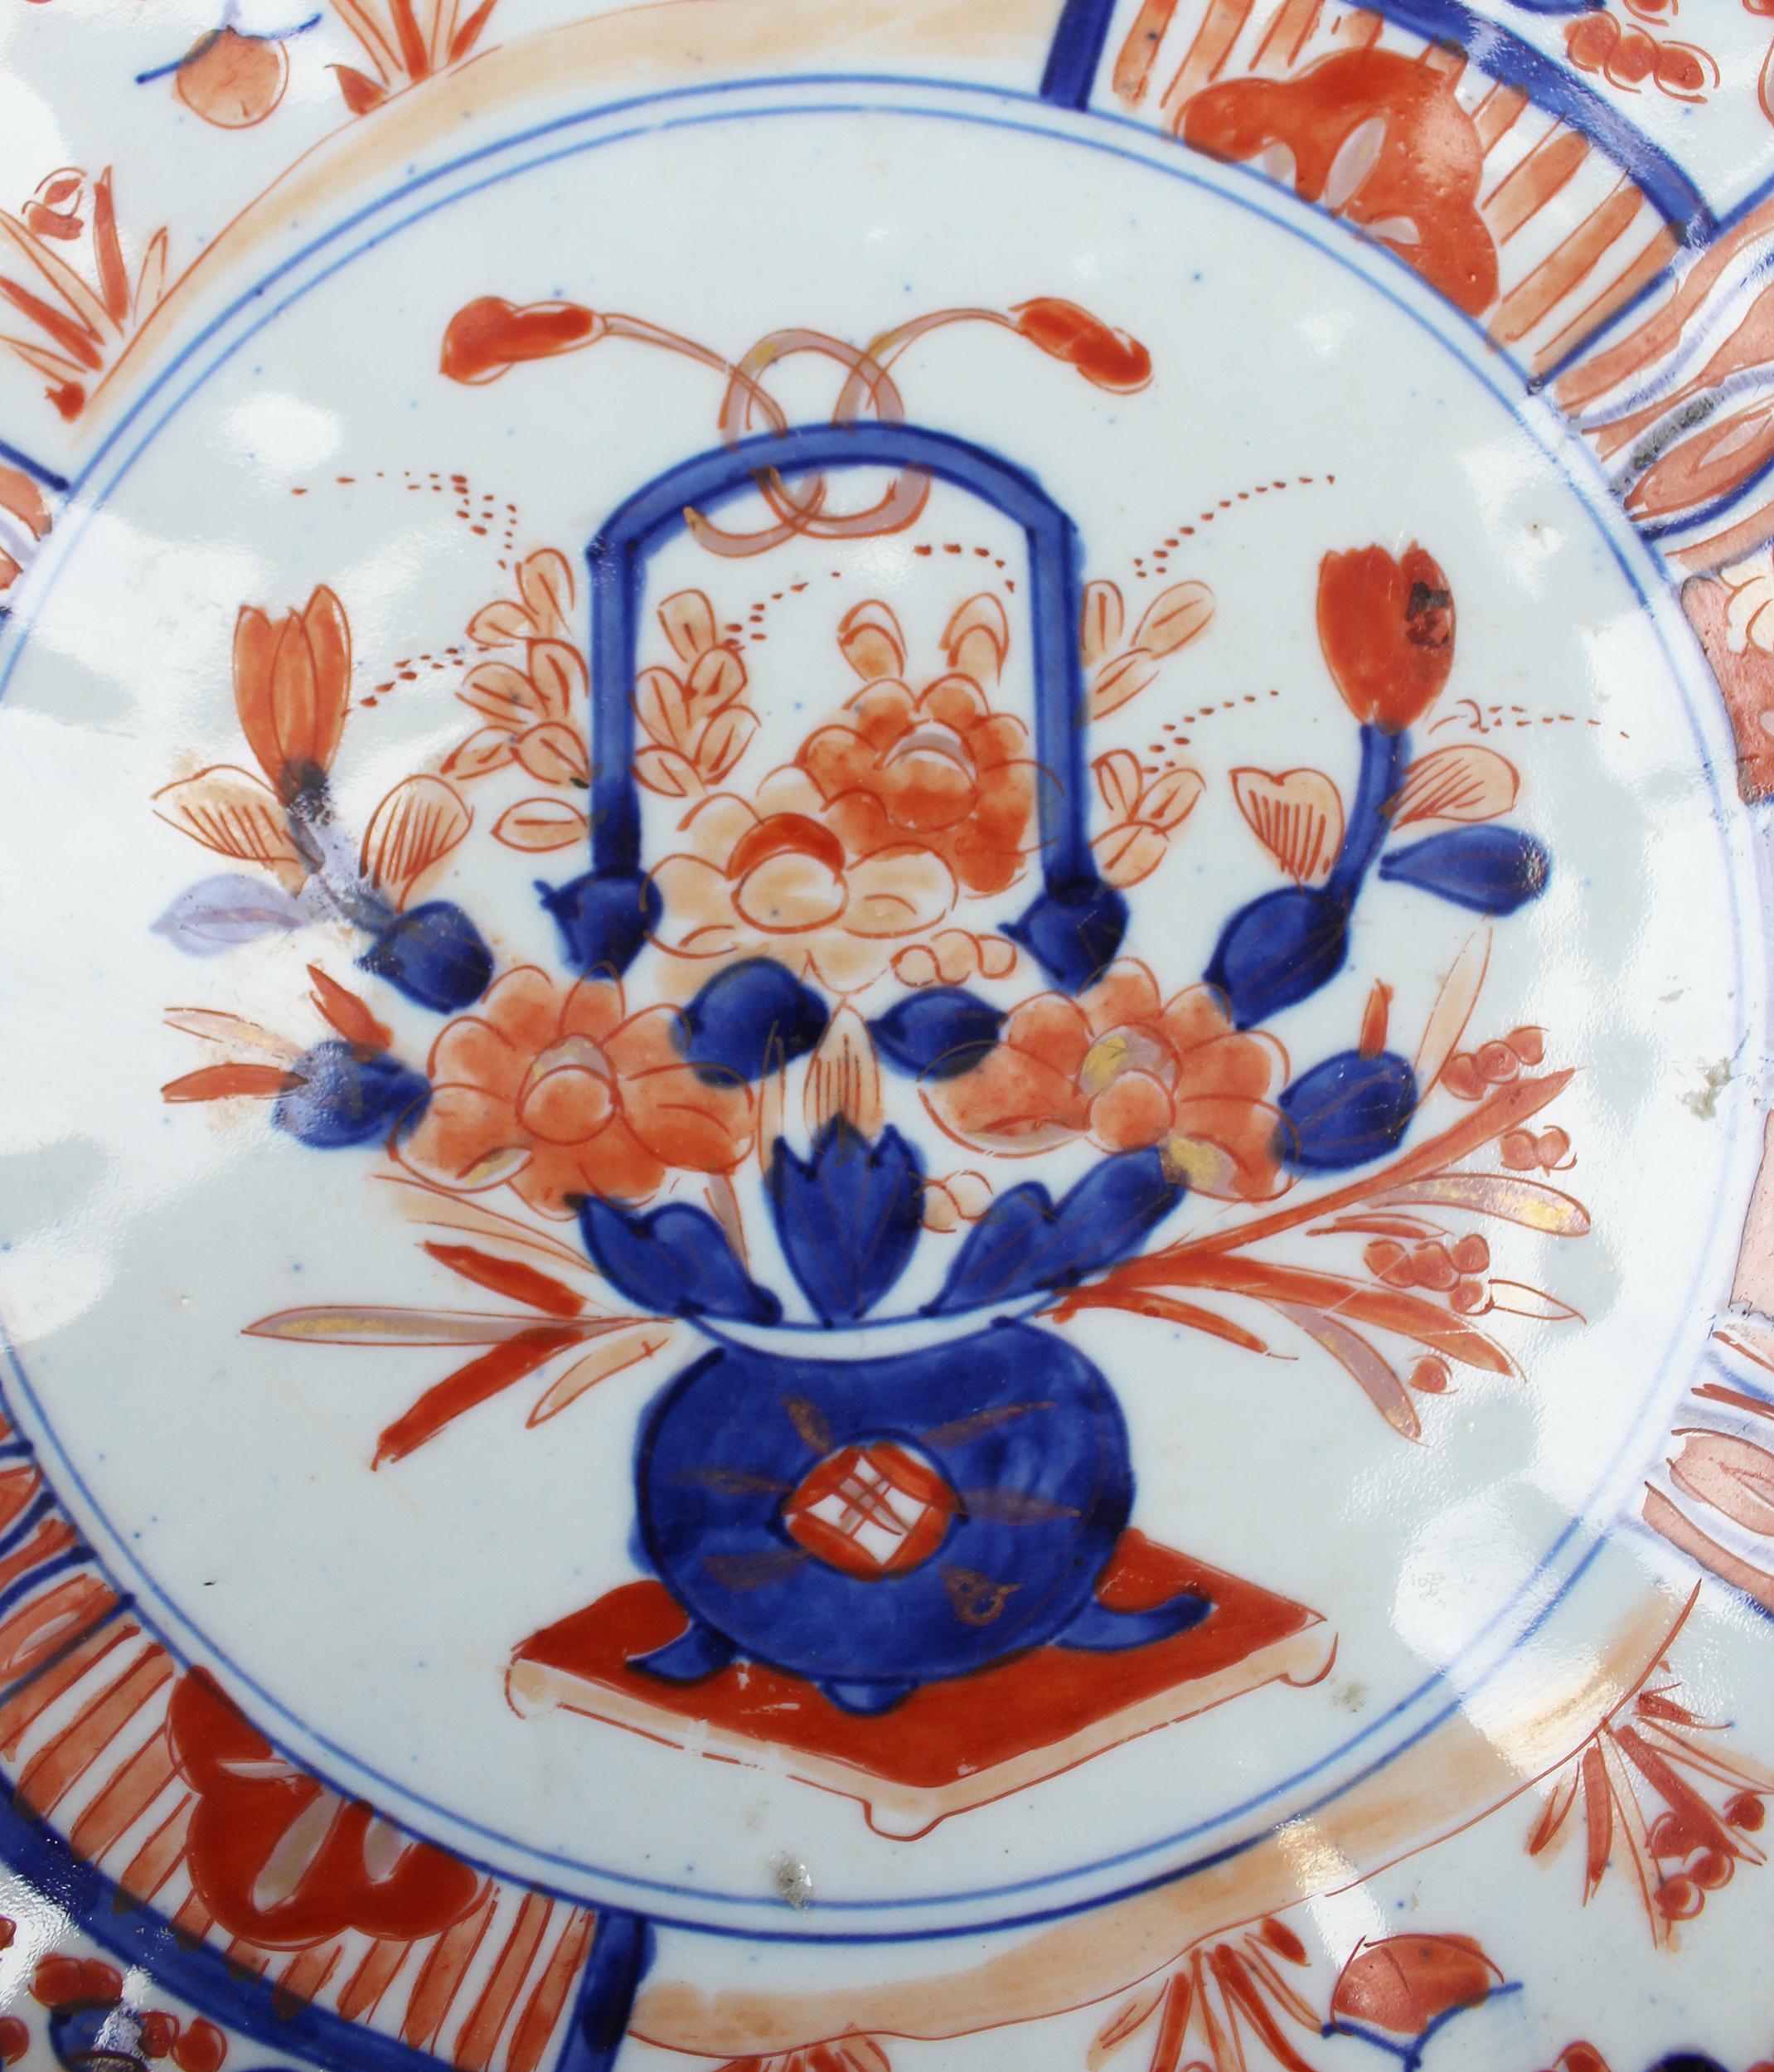 19th century Japanese Imari ware porcelain hand painted plate with flower motifs in red and blue, typical of this style. 

 